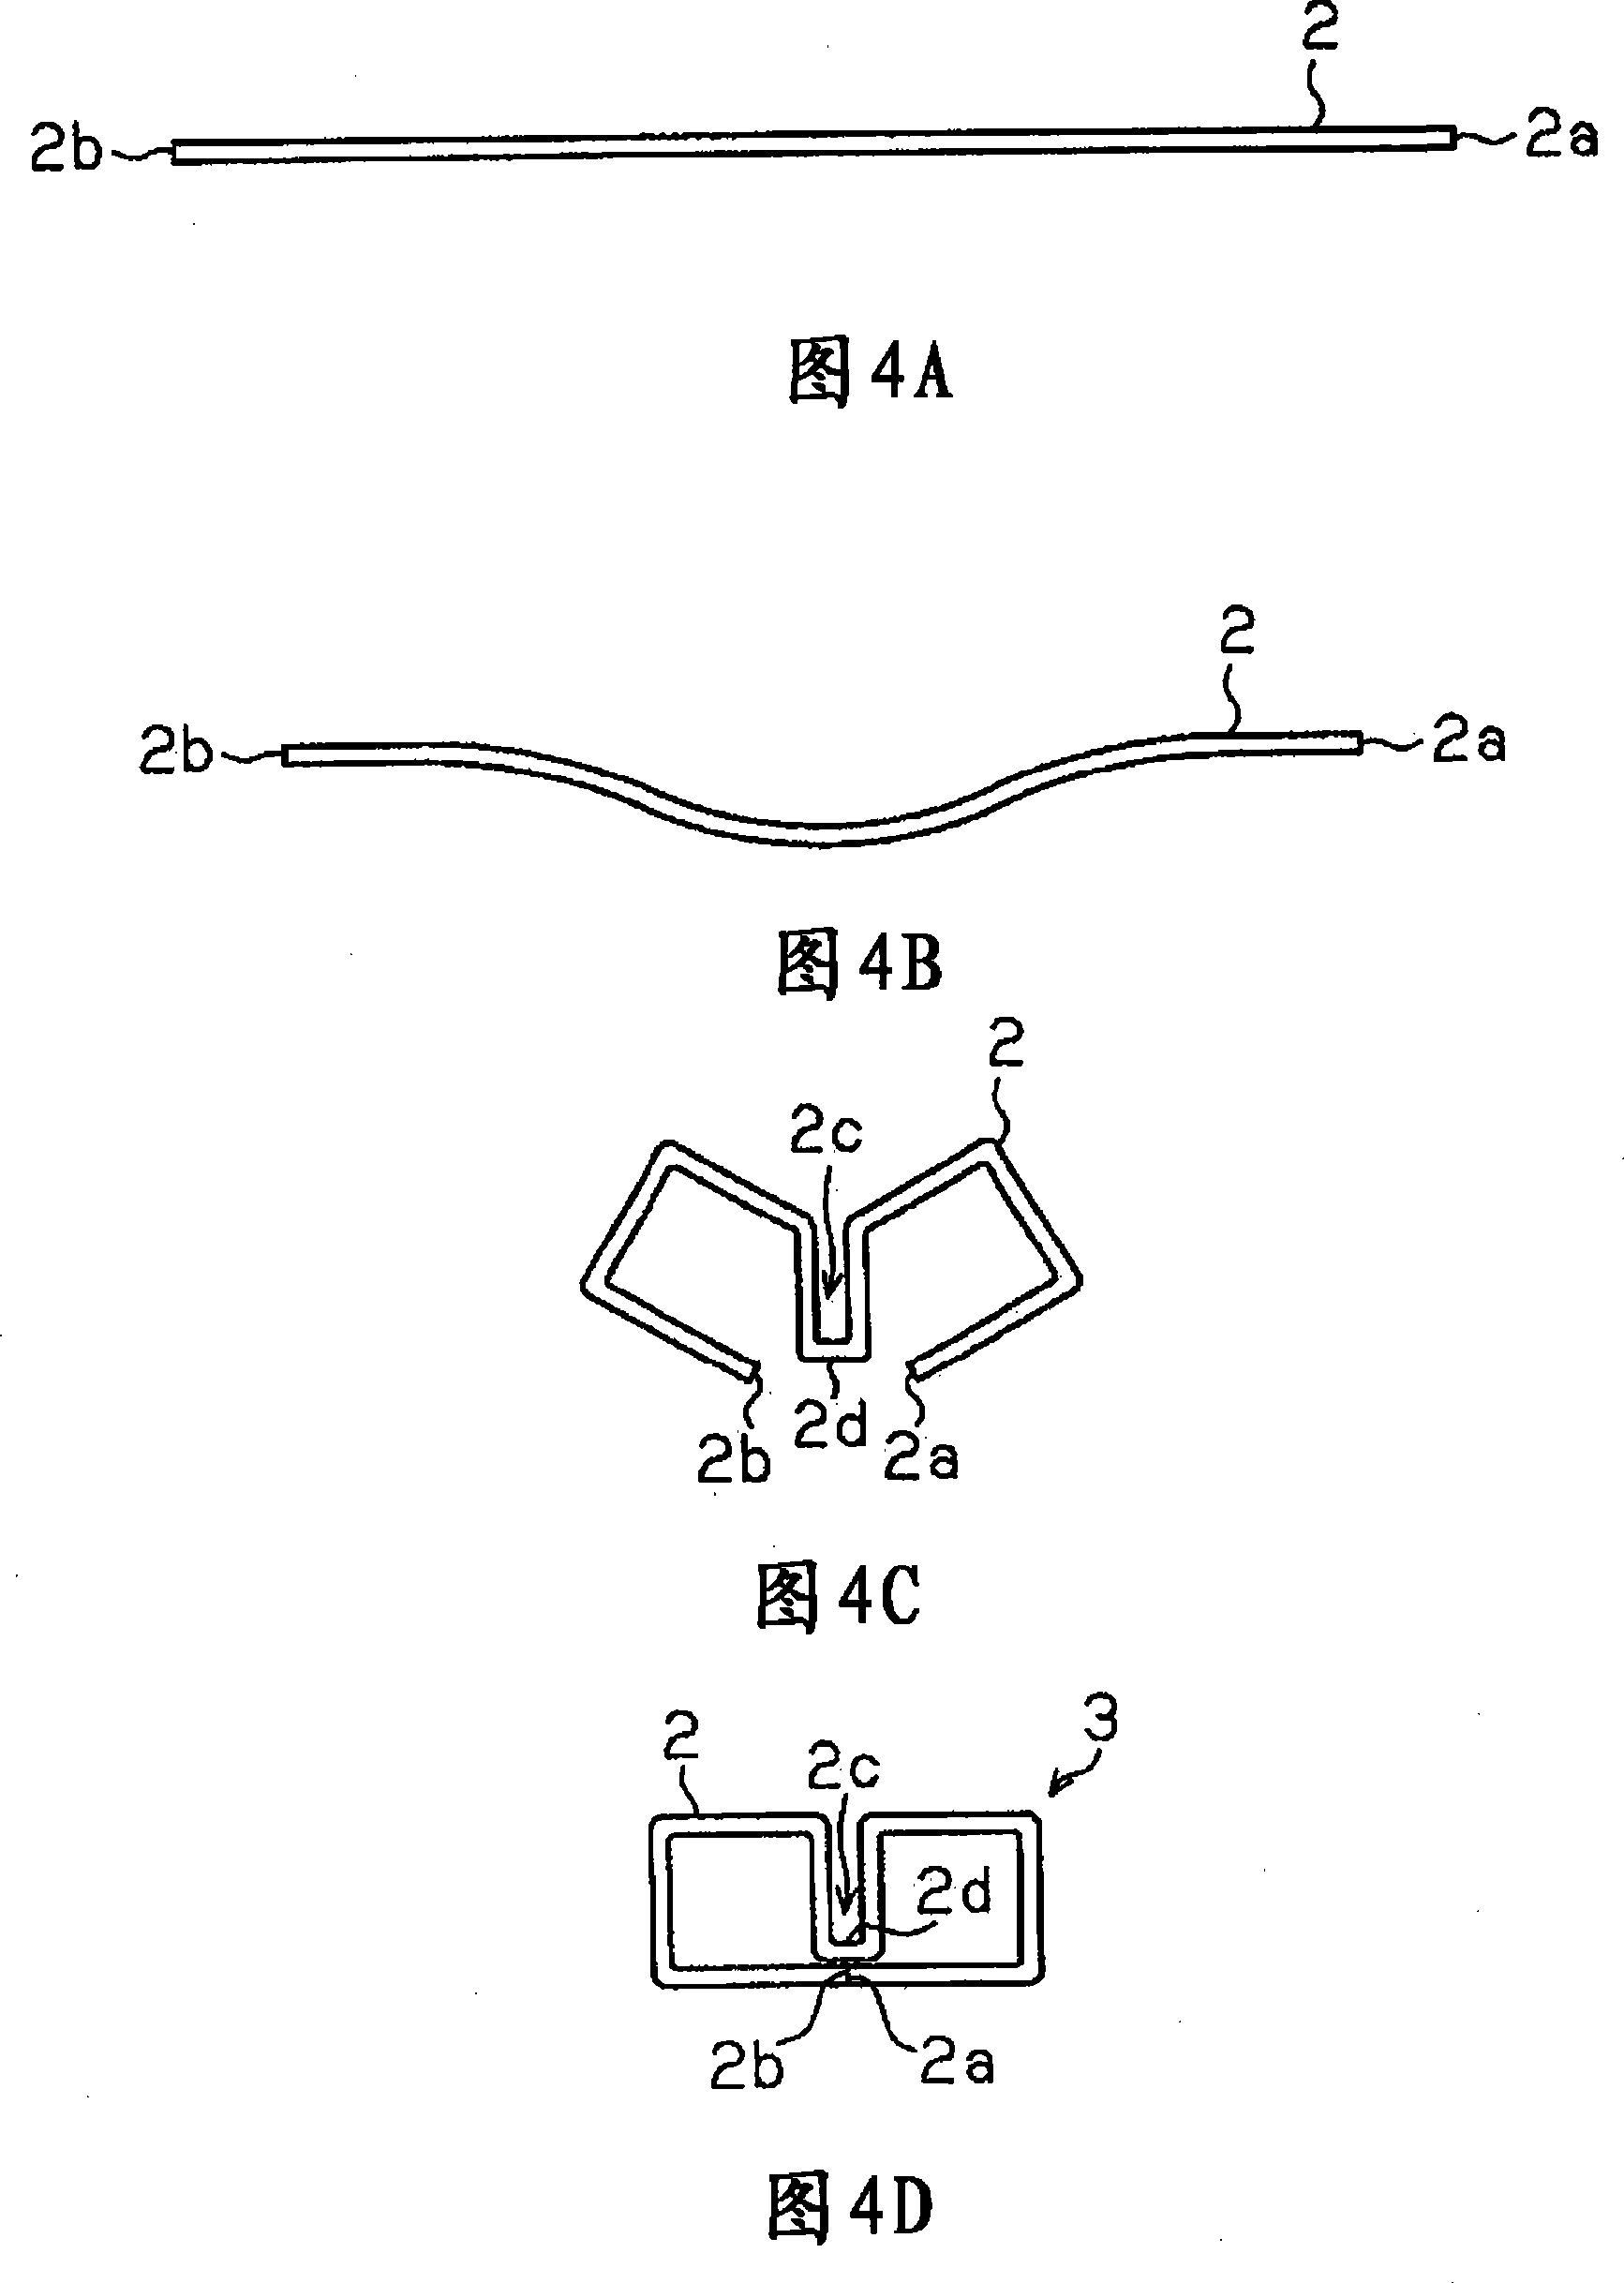 Method for manufacturing impact absorber for vehicle